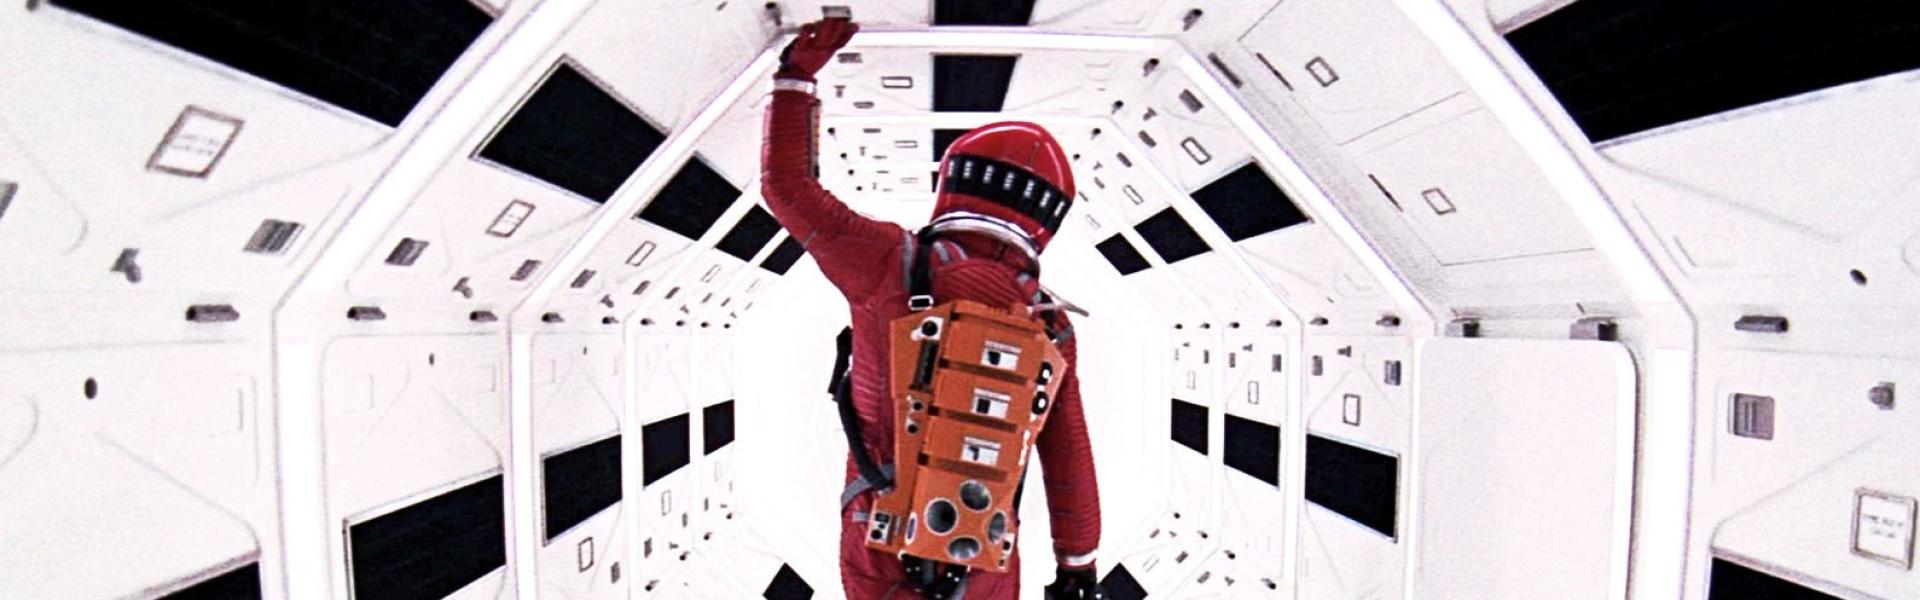 2001: A Space Odyssey's Score Is Still Mind-Bending and Exhilarating